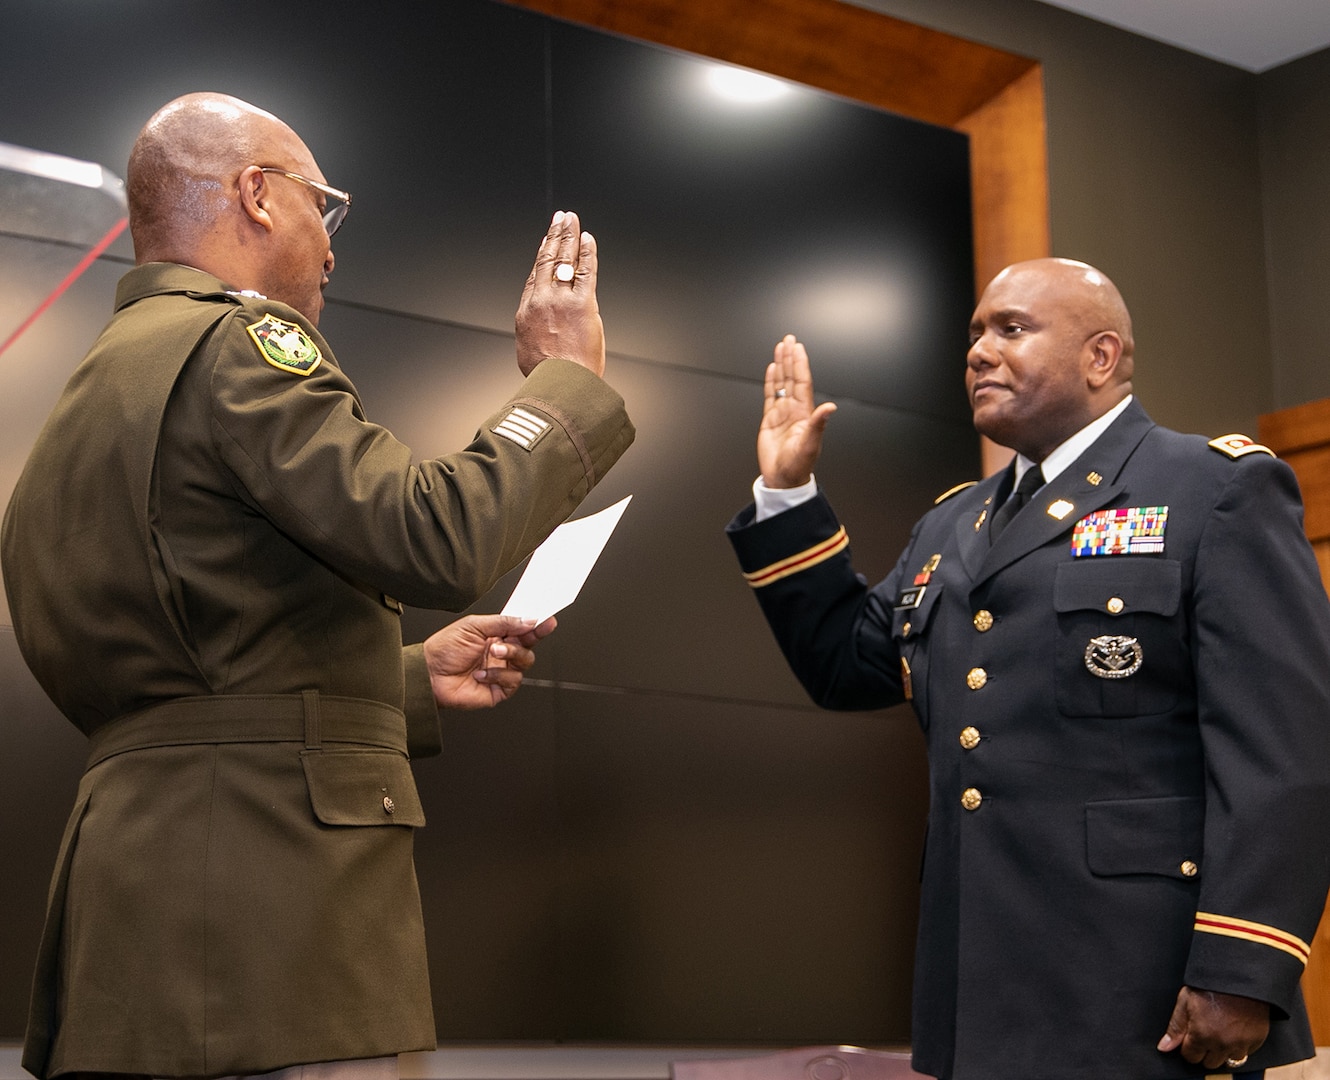 Maj. Gen. Rodney Boyd, Assistant Adjutant General – Army, and Commander of the Illinois Army National Guard, administers the oath of commissioned officers to newly-promoted Maj. Anthony McClain, Security Cooperations Officer, and Director, Diversity, Equity and Inclusion, Illinois National Guard, during a promotion ceremony March 17 at the Illinois Military Academy on Camp Lincoln, Springfield, Illinois.